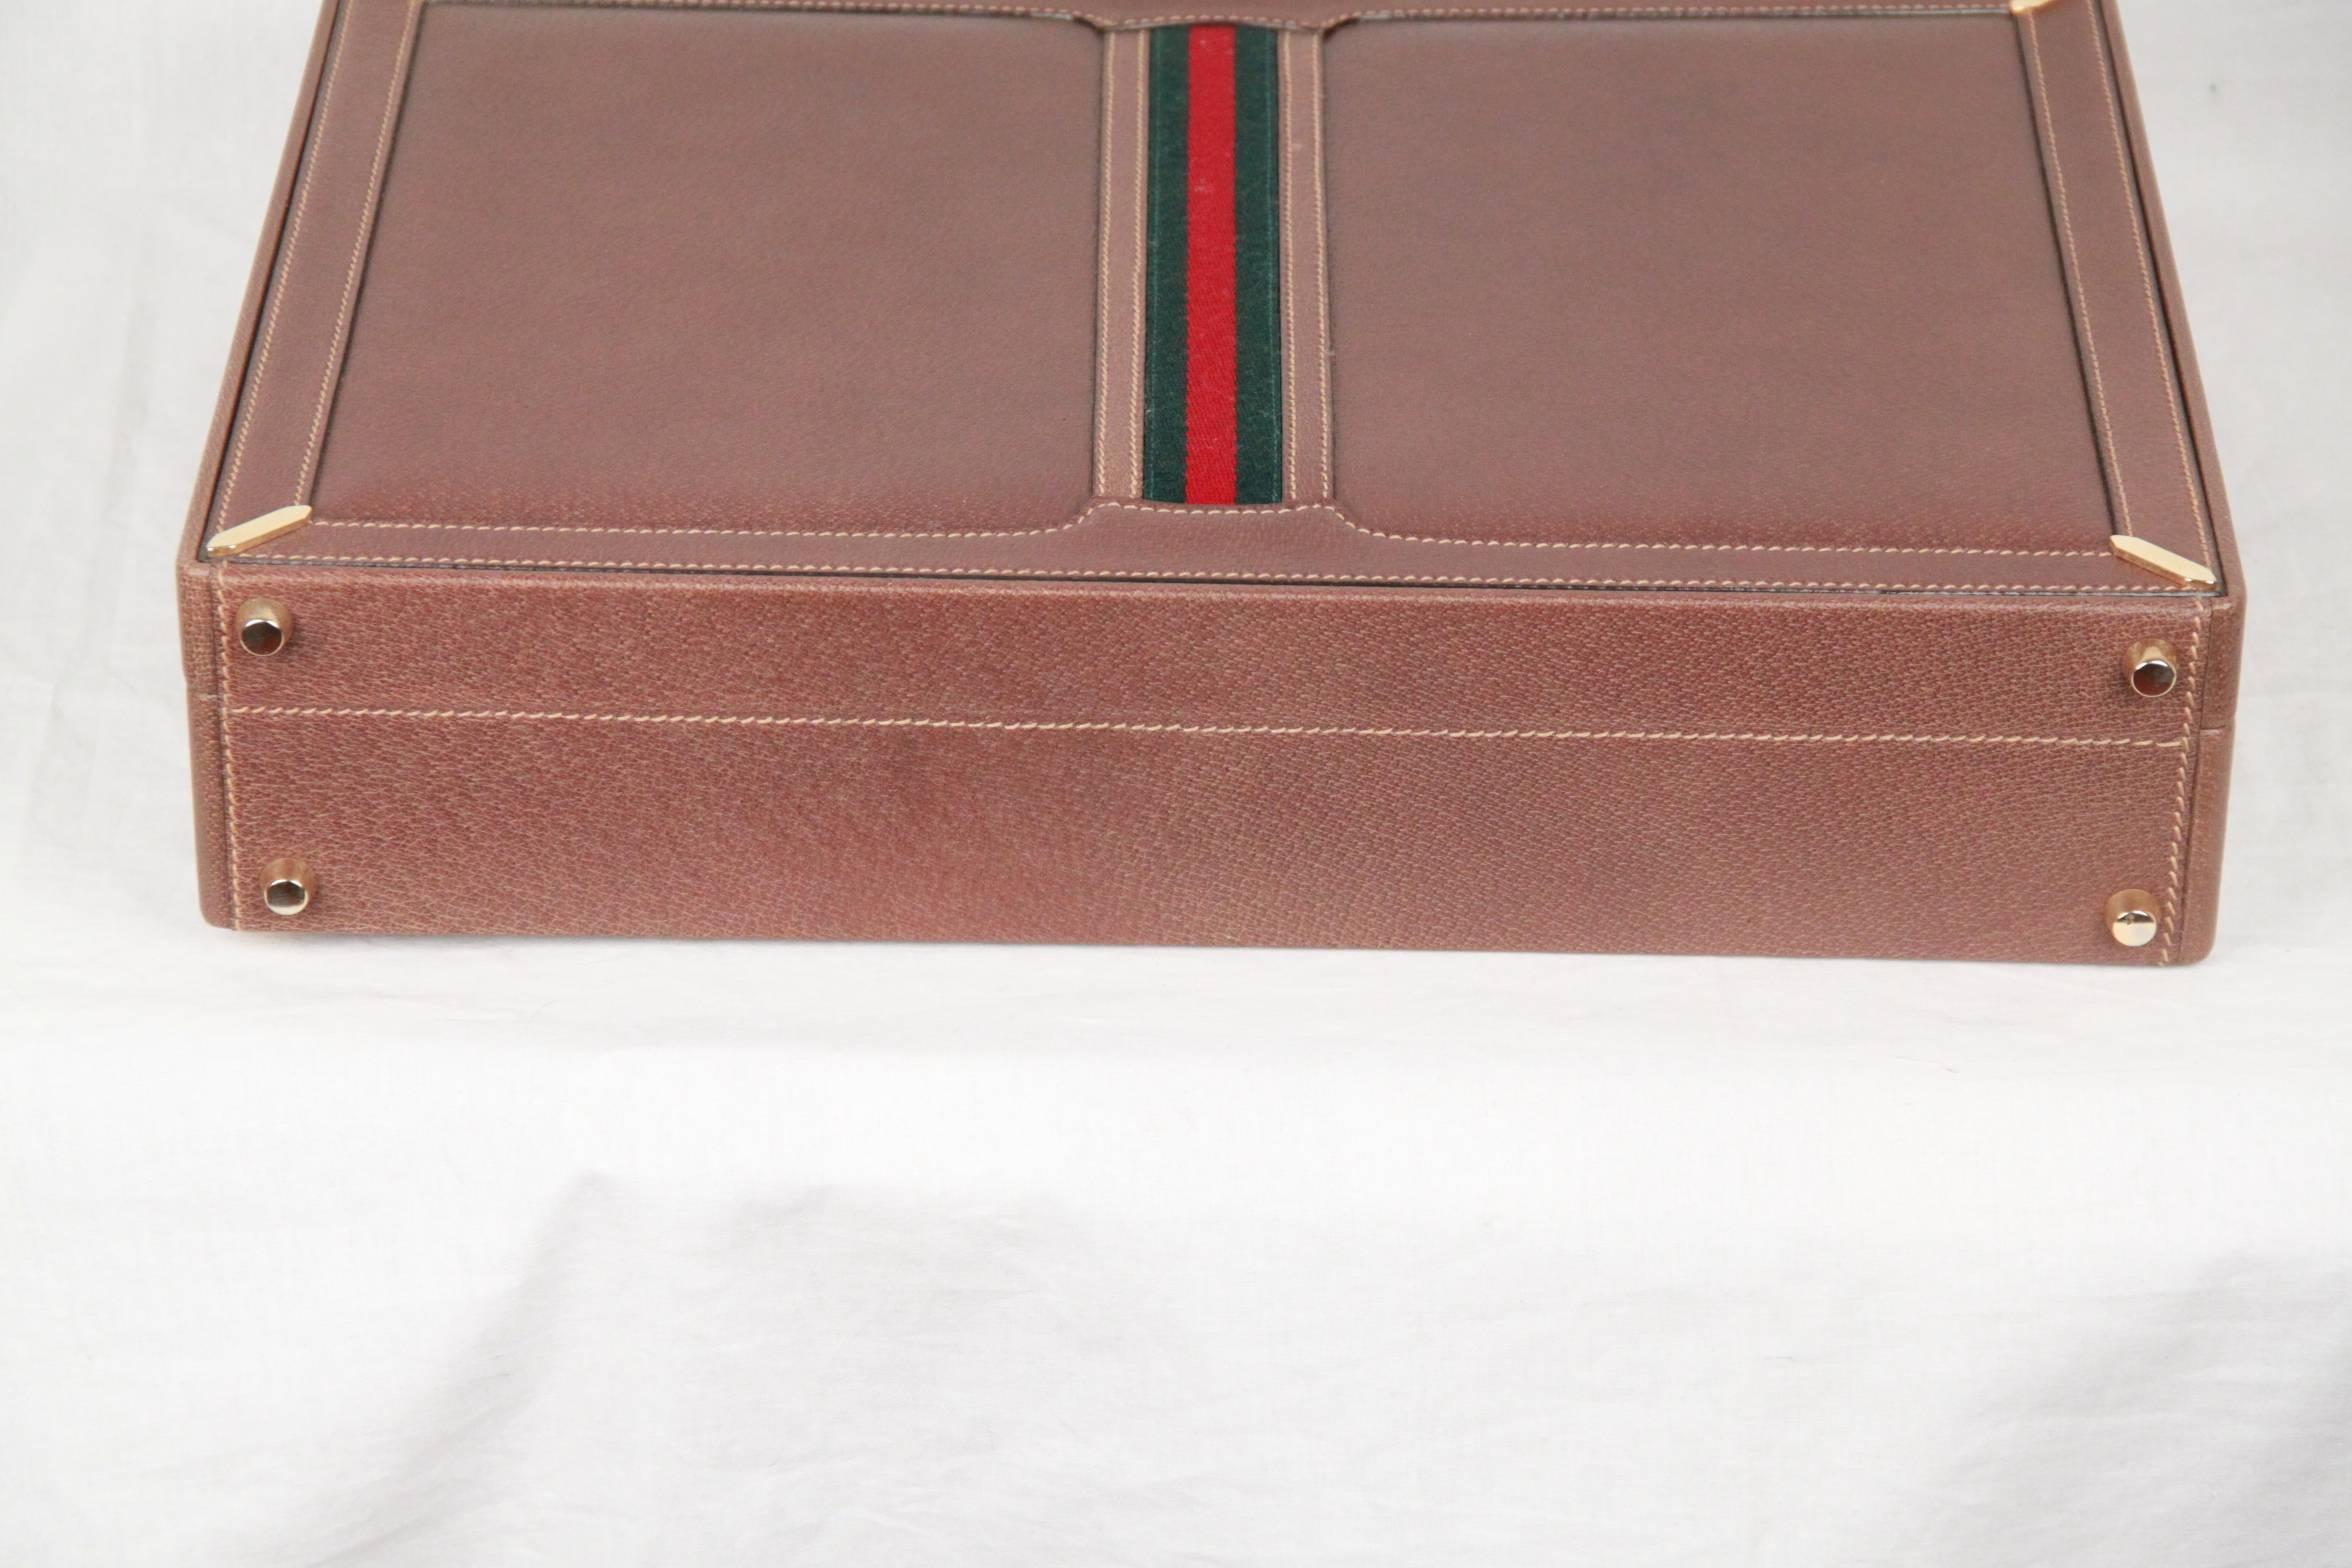 GUCCI VINTAGE Tan Leather HARD SIDE BRIEFCASE Work Bag w/ Stripes In Excellent Condition In Rome, Rome